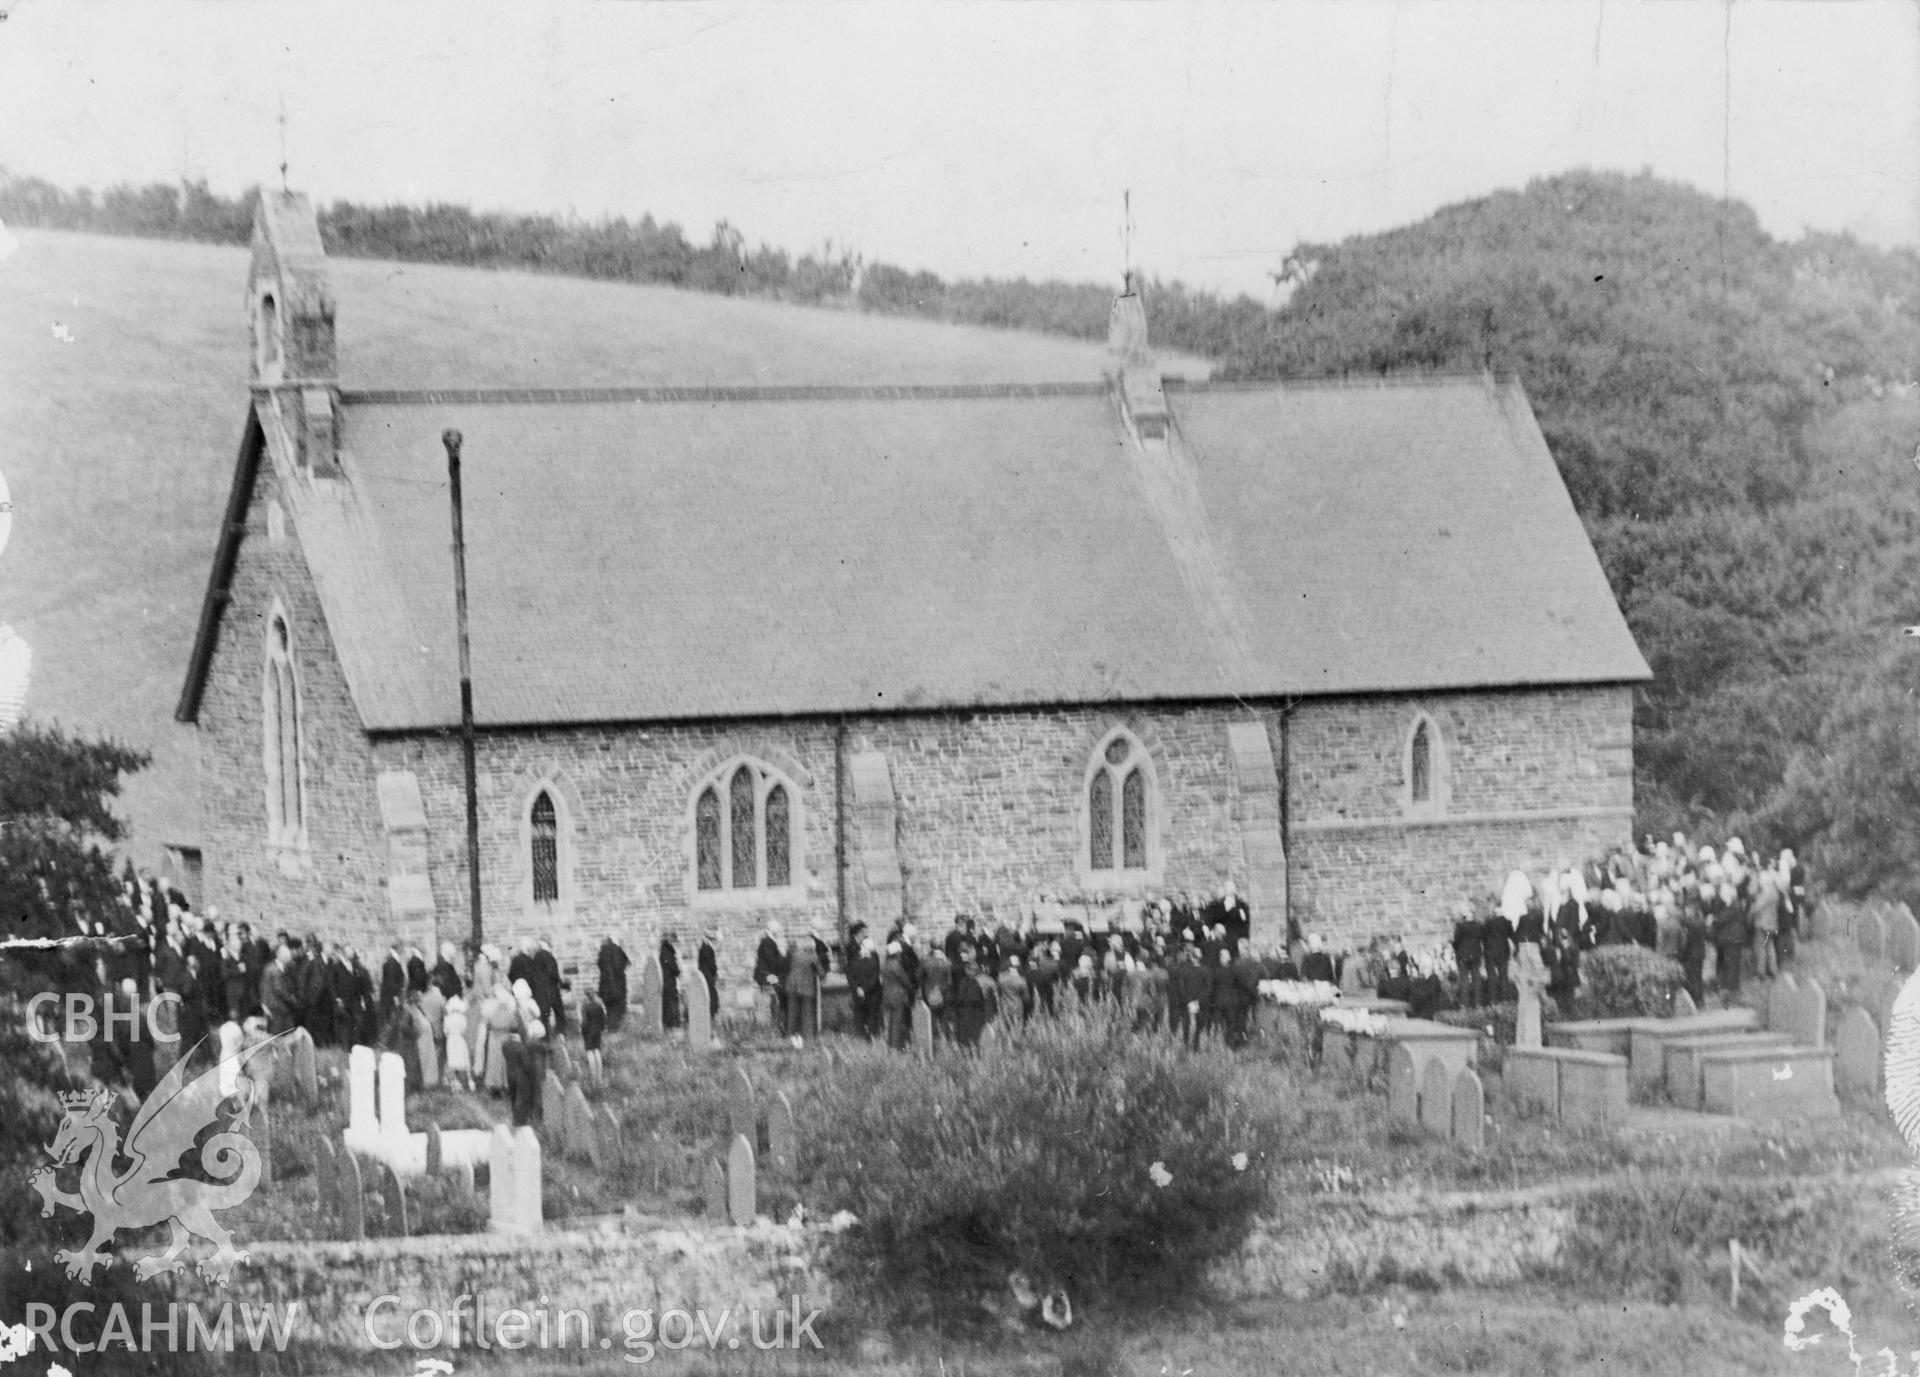 St Hychans Church, Llanychaiarn; B&W photo copied from an early C20th original loaned by Aberystwyth Yesterday. Copy negative held.